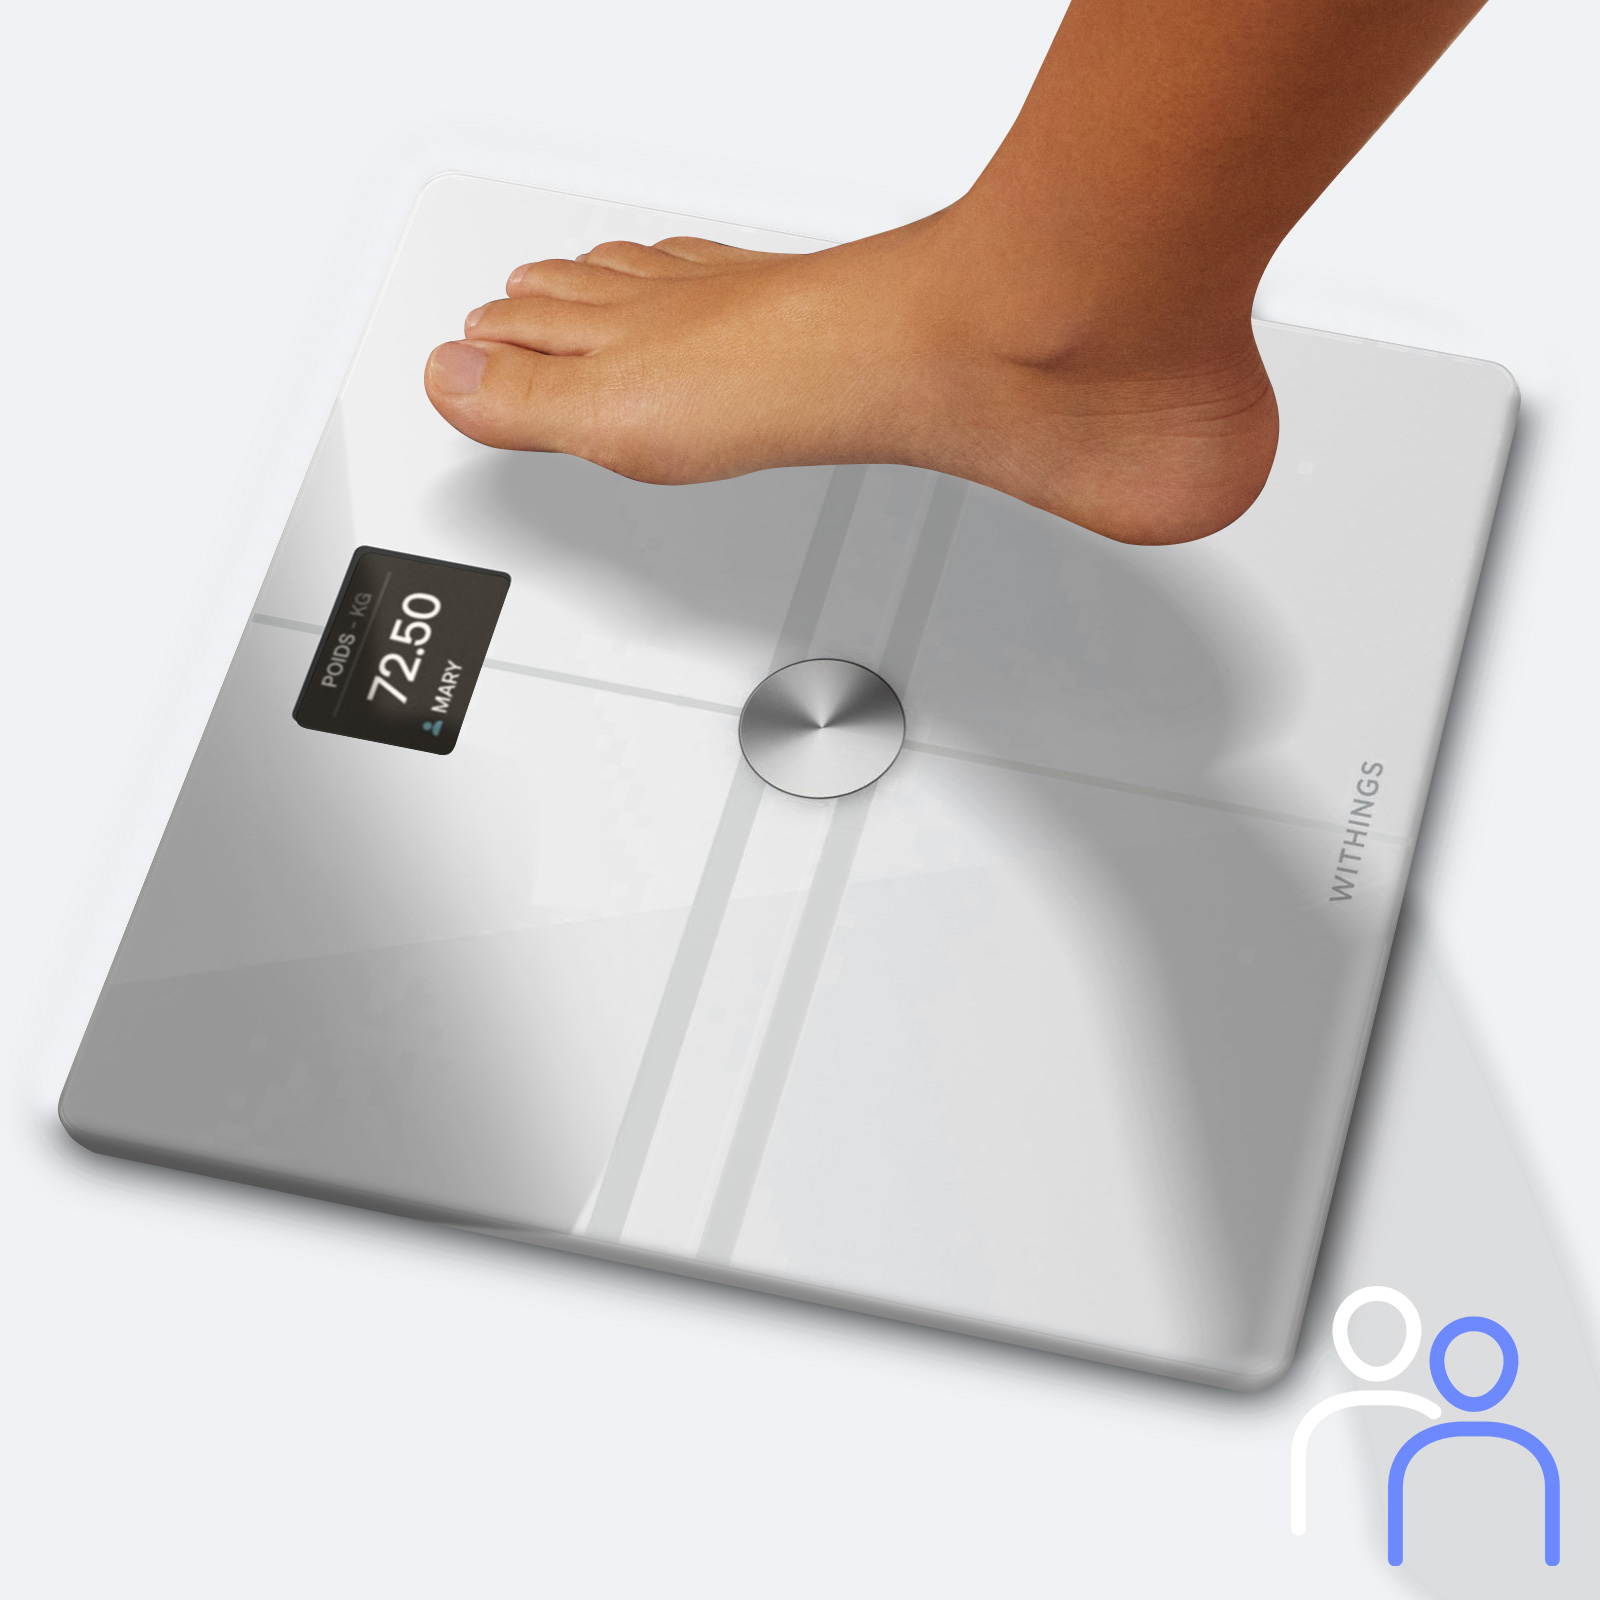 Balance connectée Withings Body + blanc